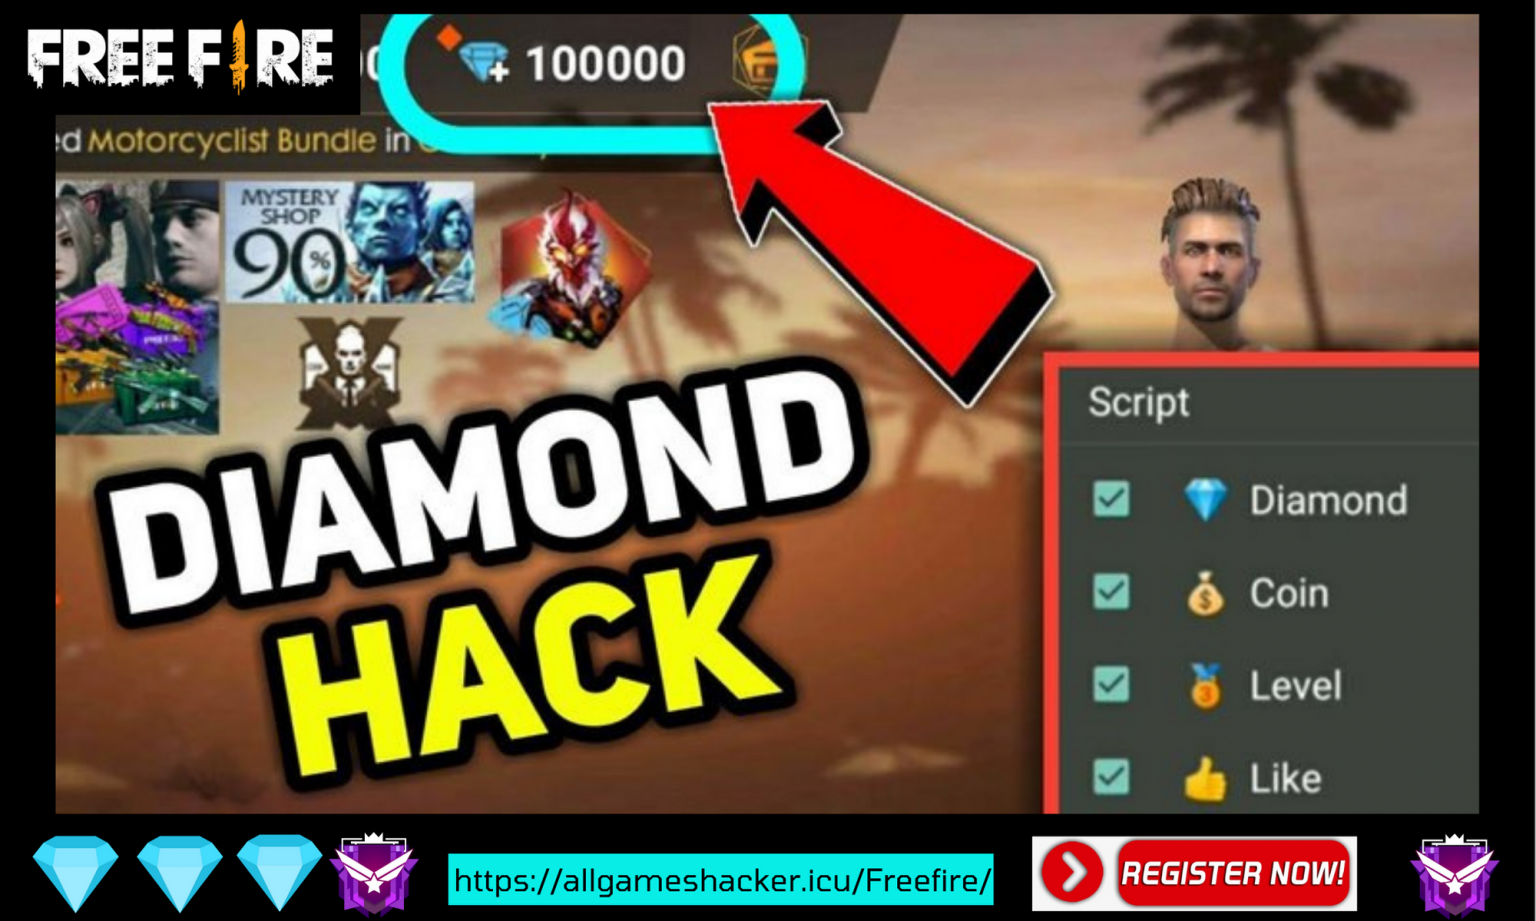 free fire diamond and coin hack